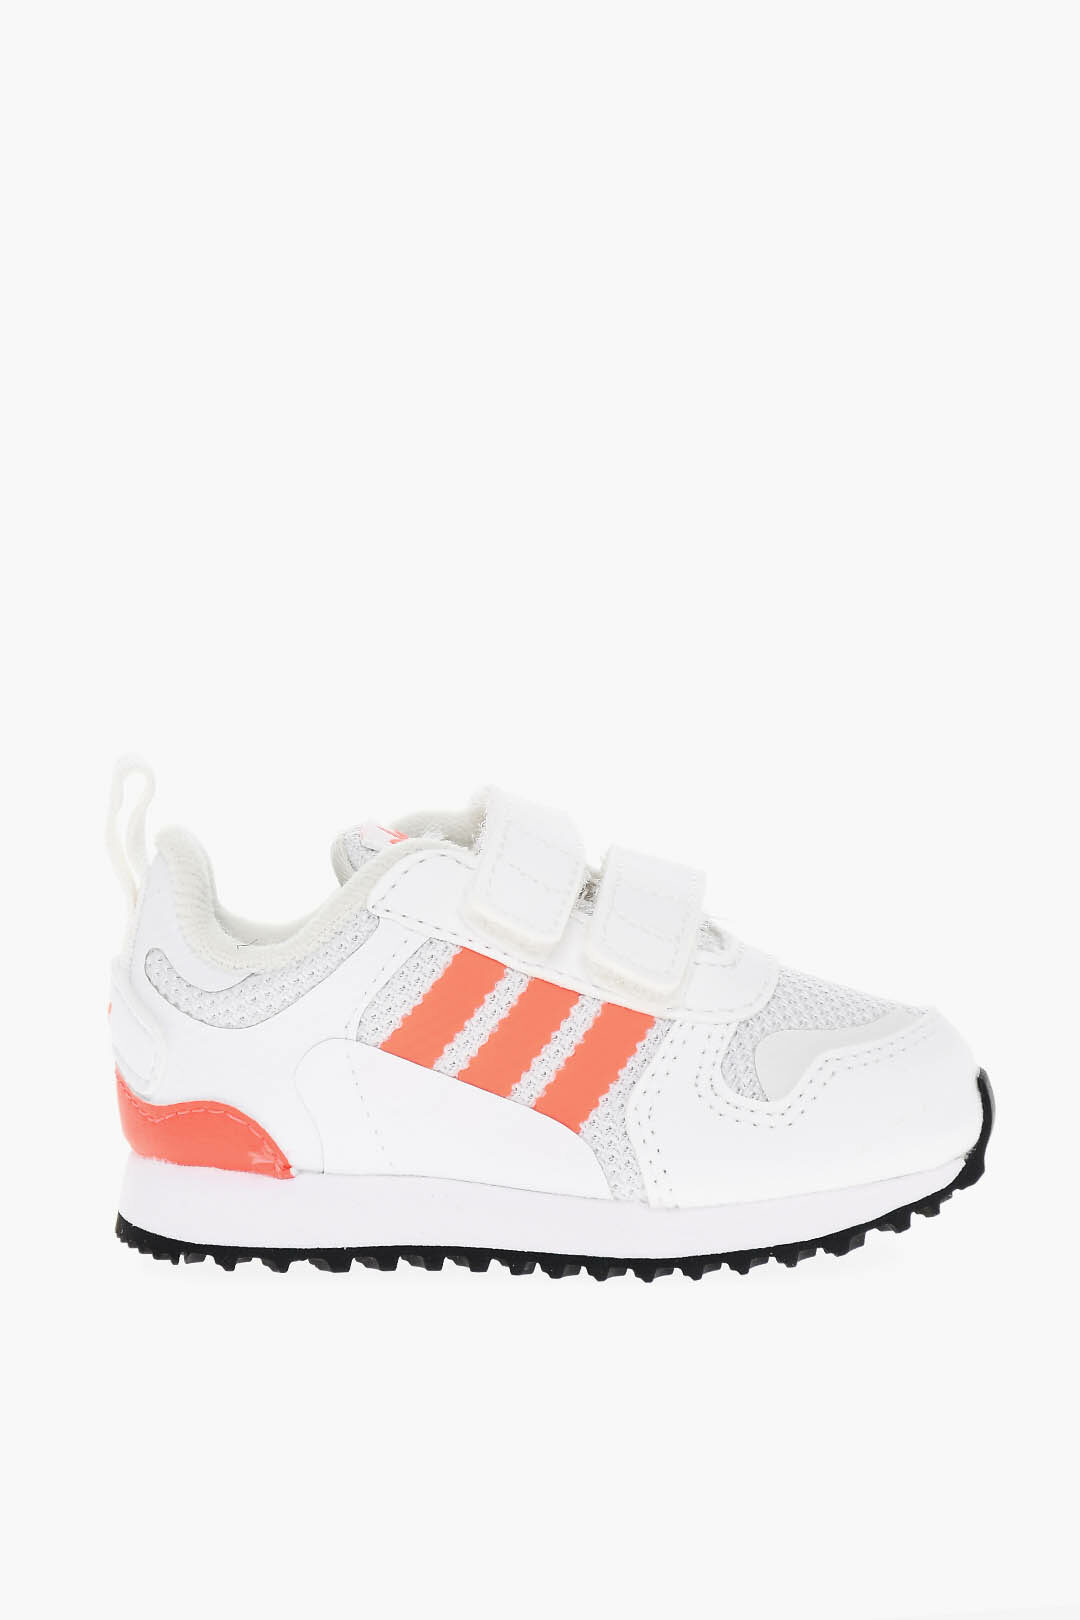 Glamood 700 boys - Adidas CF ZX Kids HD with Outlet Velcro Fastening Low Sneakers